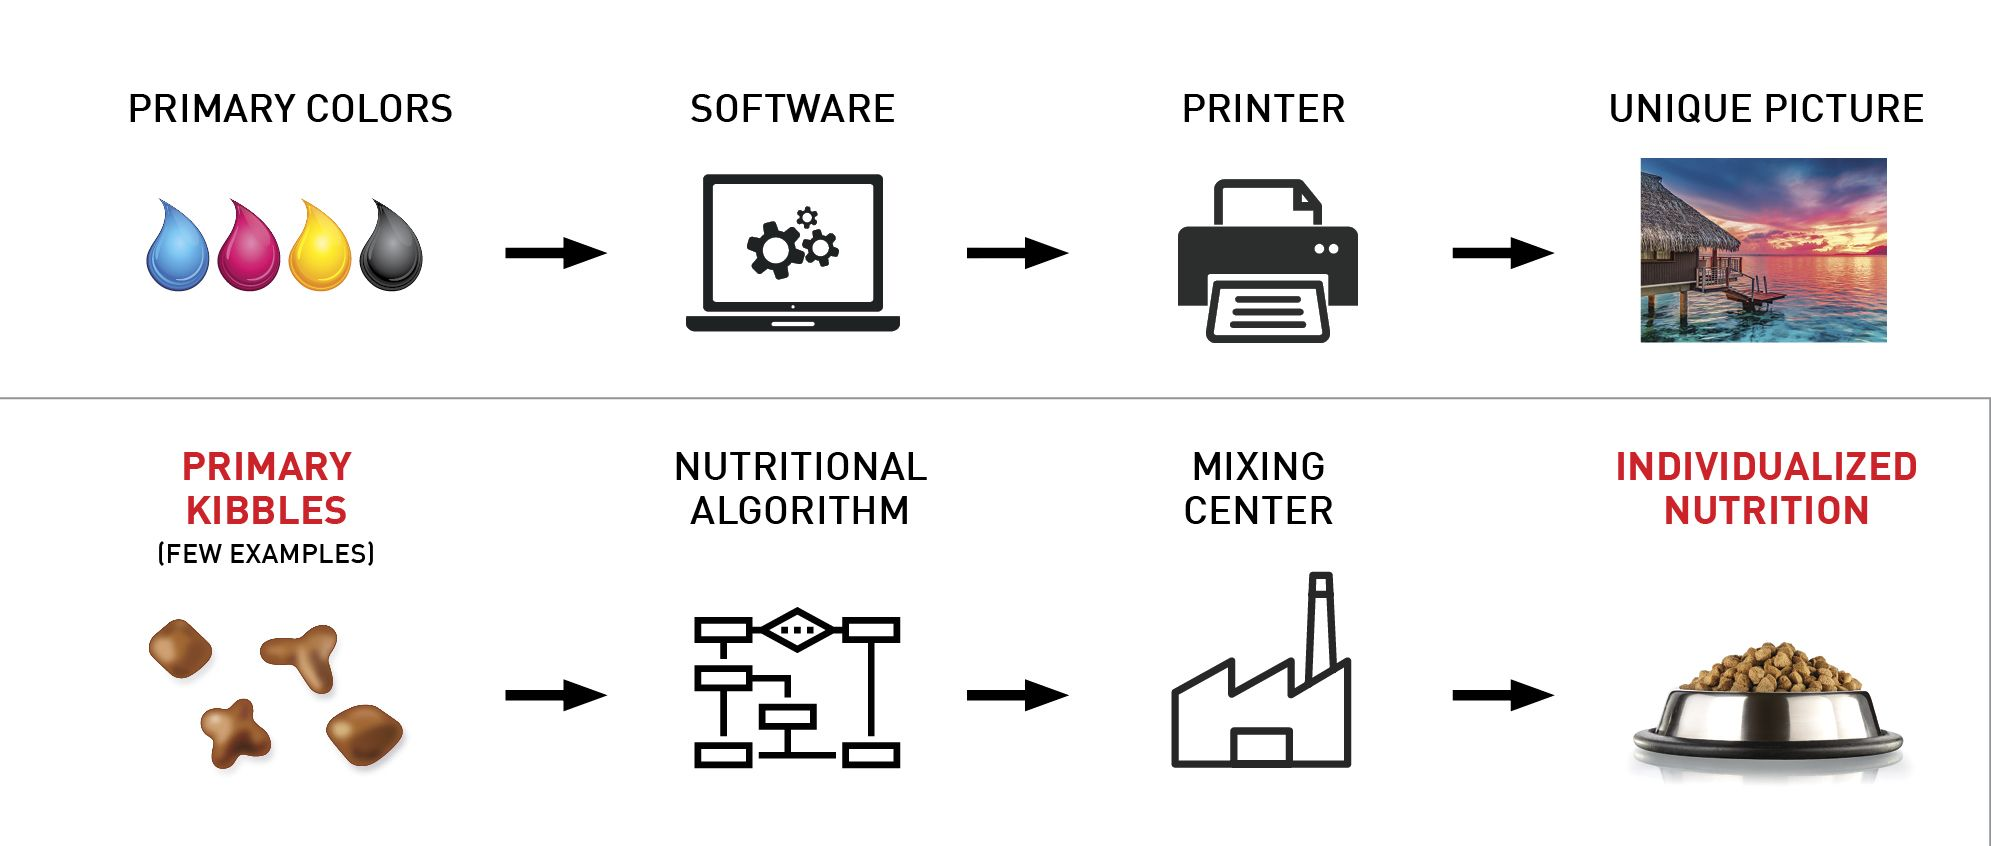 The concept of producing a specific diet for an individual animal can be compared to the way a printer uses basic colors to build a full-color image